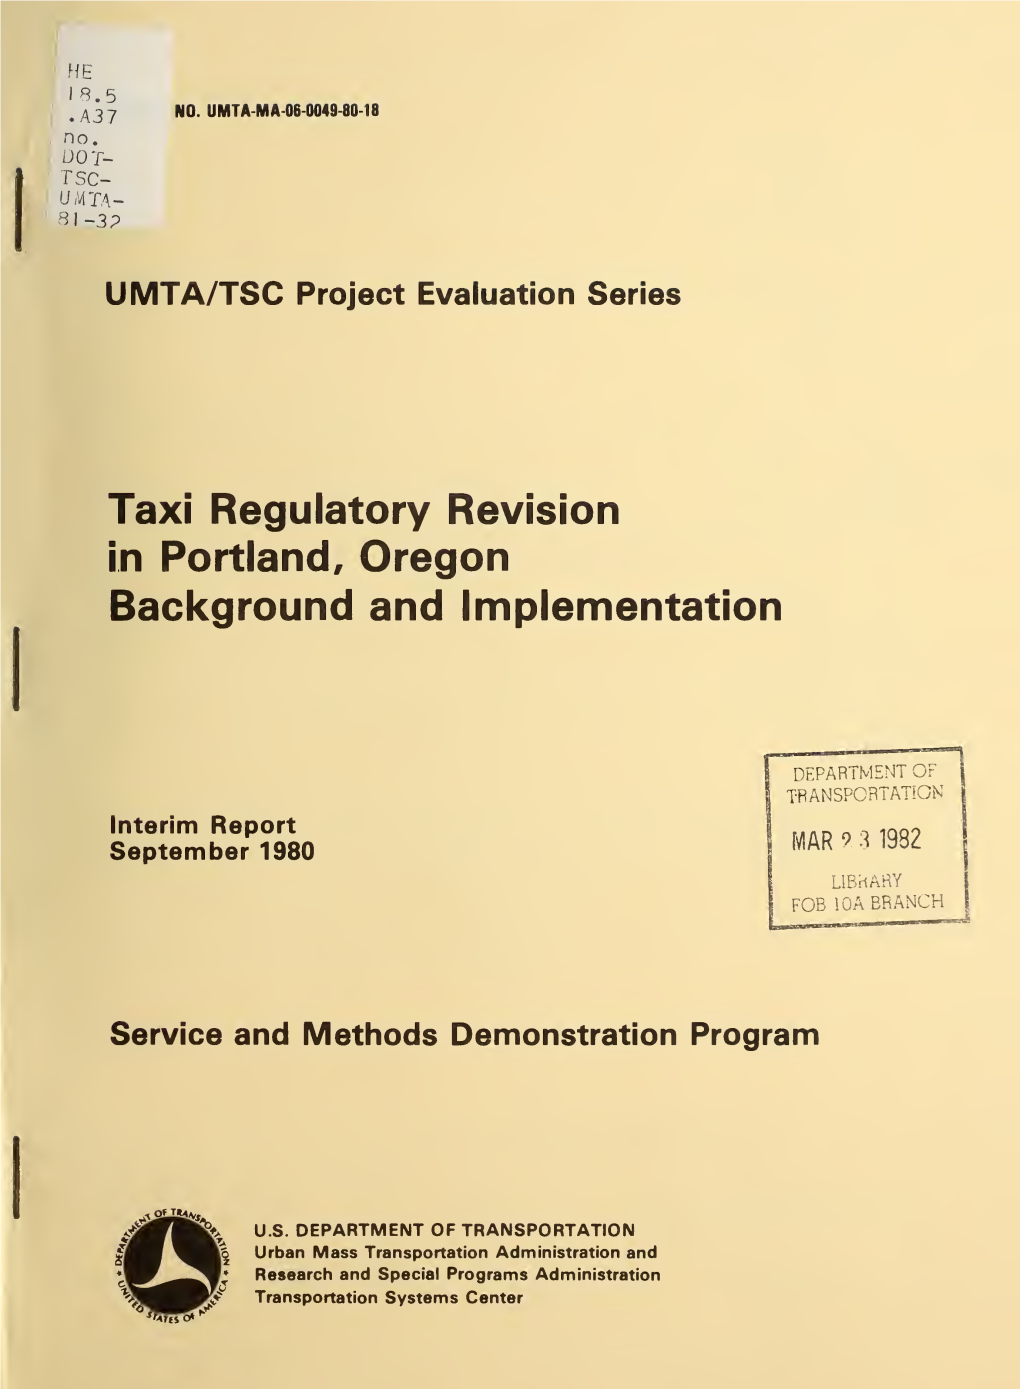 Taxi Regulatory Revision in Portland, Oregon Background and Implementation